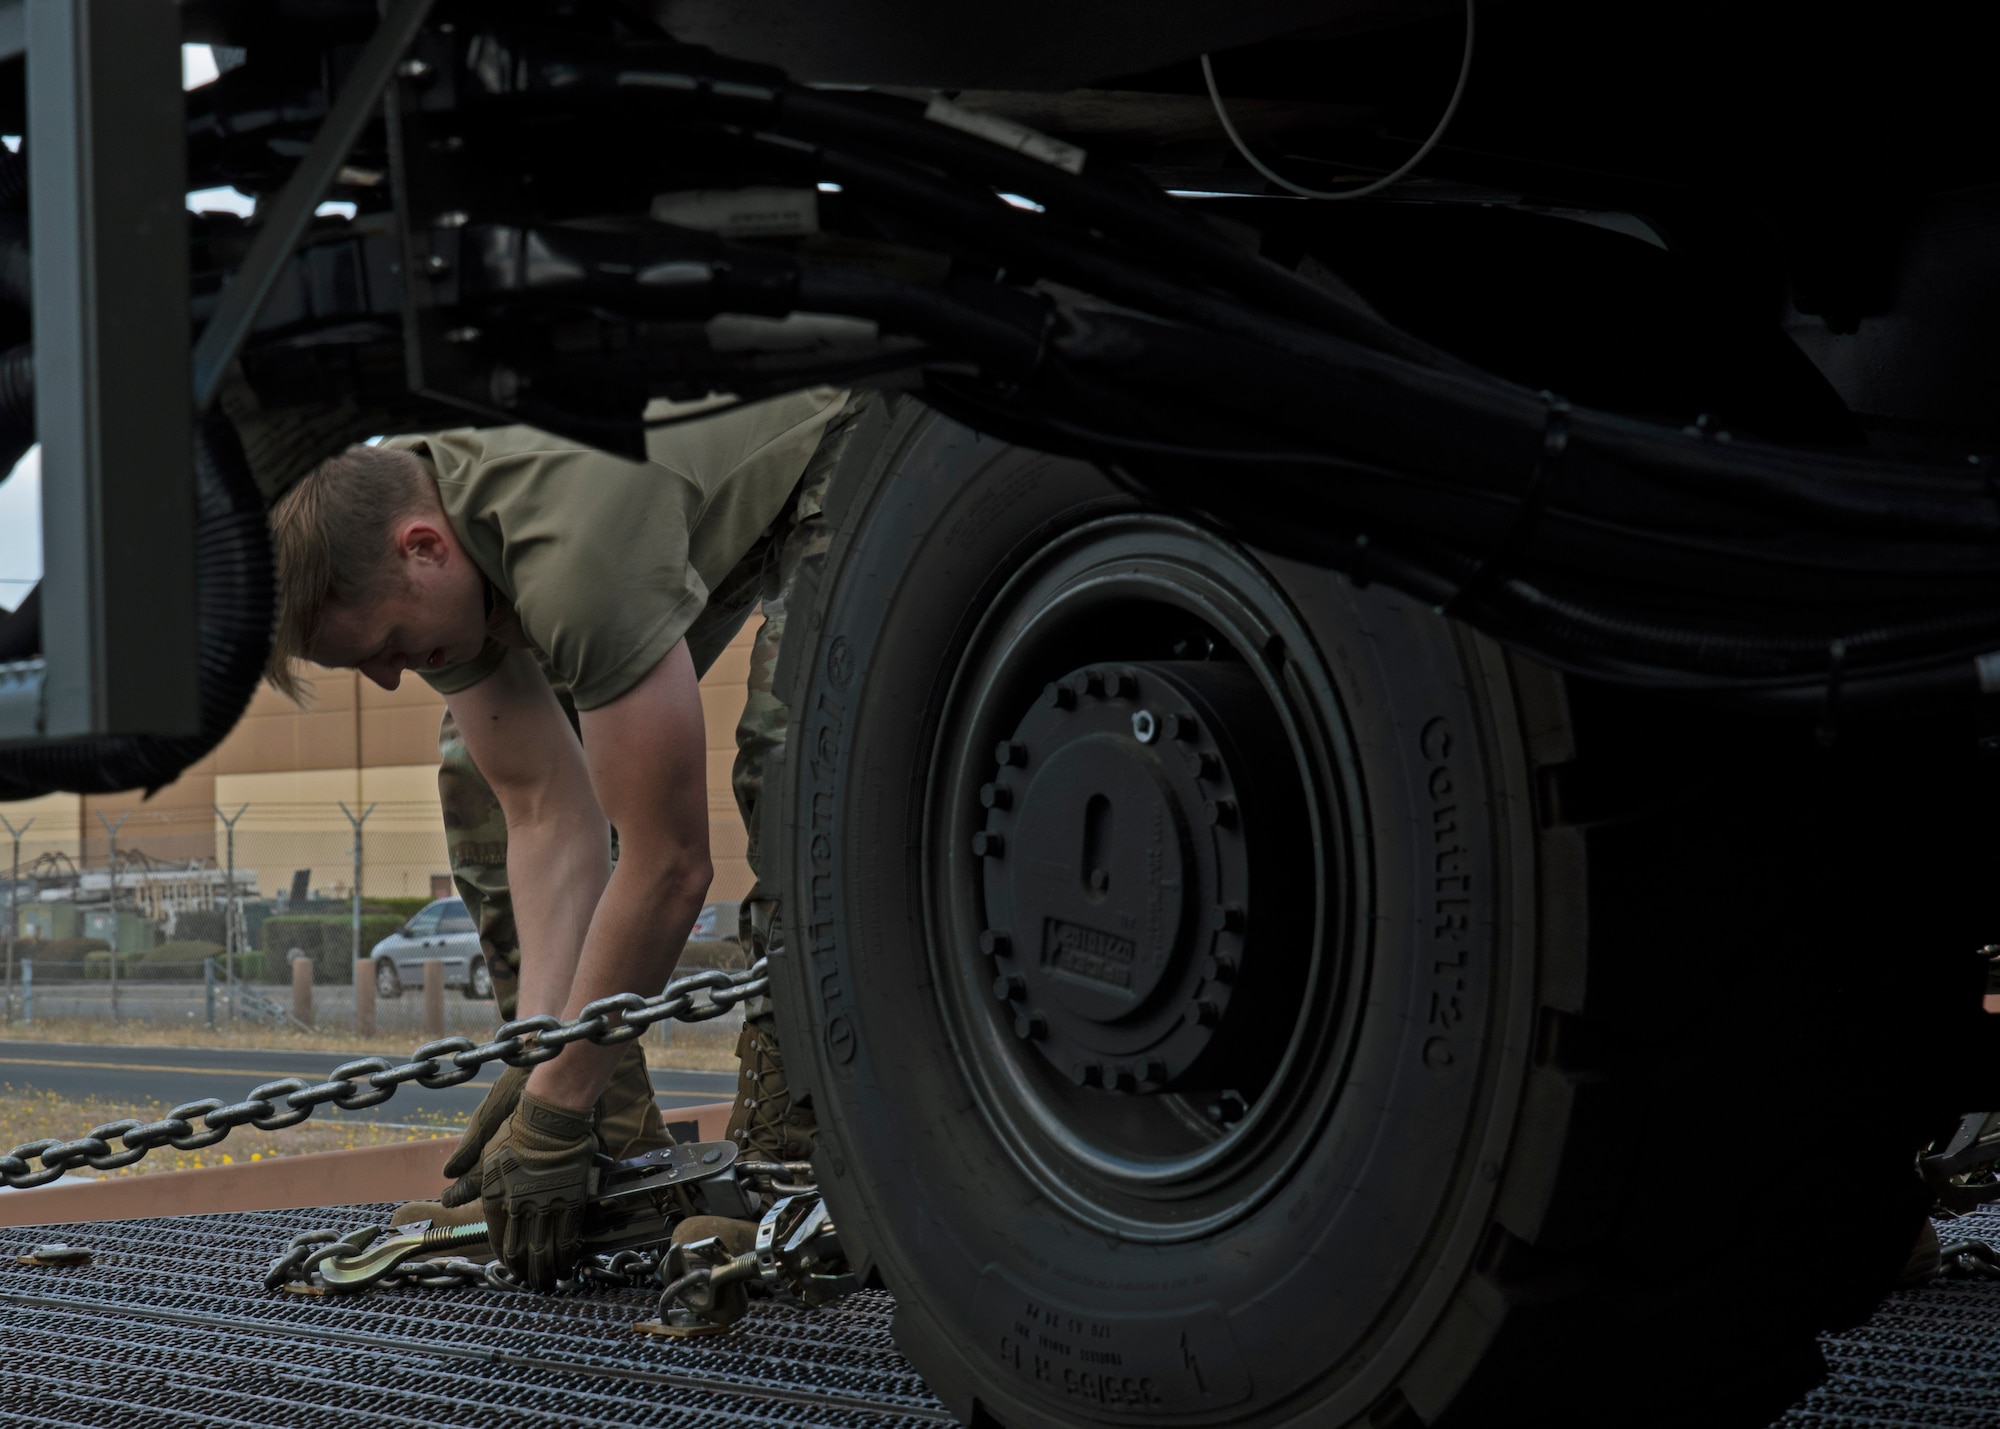 U.S. Air Force Senior Airman Trenton Dancer, air freight operations specialist with the 62nd Aerial Port Squadron, secures a vehicle during an aircraft upload training at Joint Base Lewis-McChord, Washington, July 21, 2021. Dancer and his team will compete in the 2021 Pacific Air Forces (PACAF) Aerial Port Dawg Rodeo to showcase their job knowledge, capabilities and develop esprit de corps with other Port Dawgs. (U.S. Air Force photo by Senior Airman Zoe Thacker)